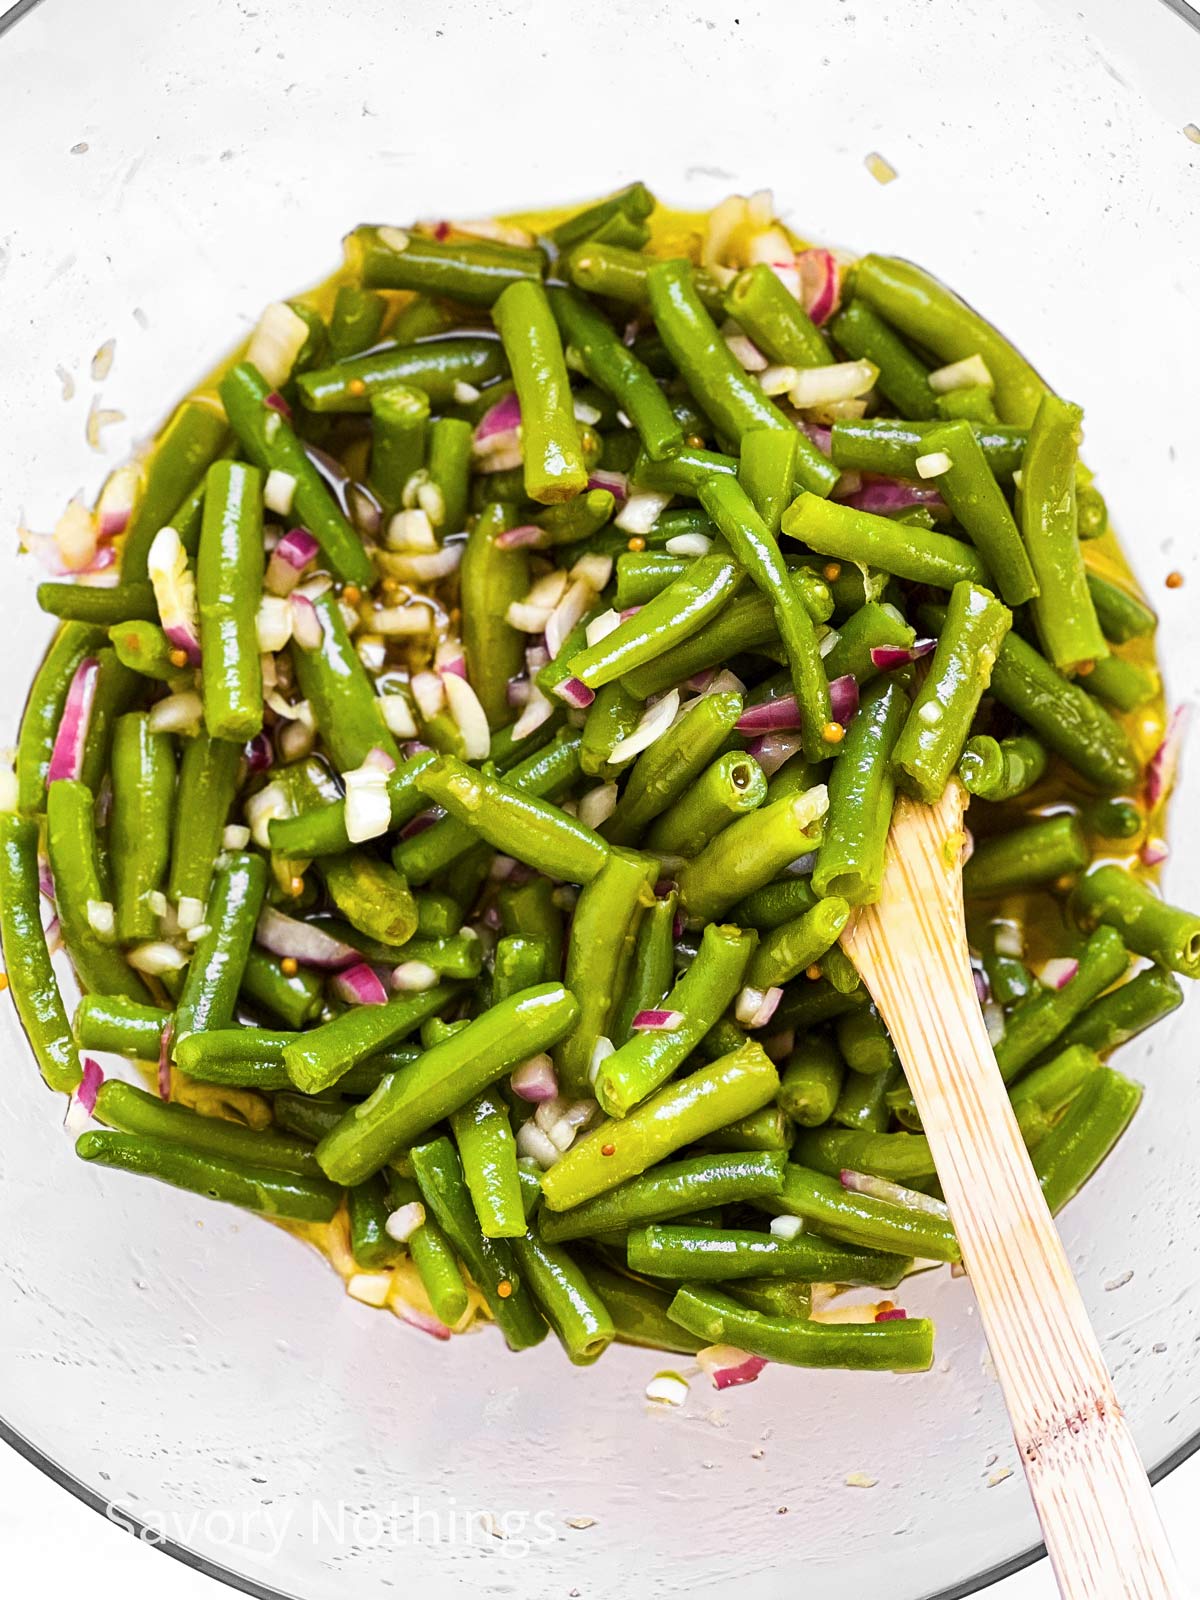 green beans and chopped onion in glass bowl, with wooden spoon stuck in